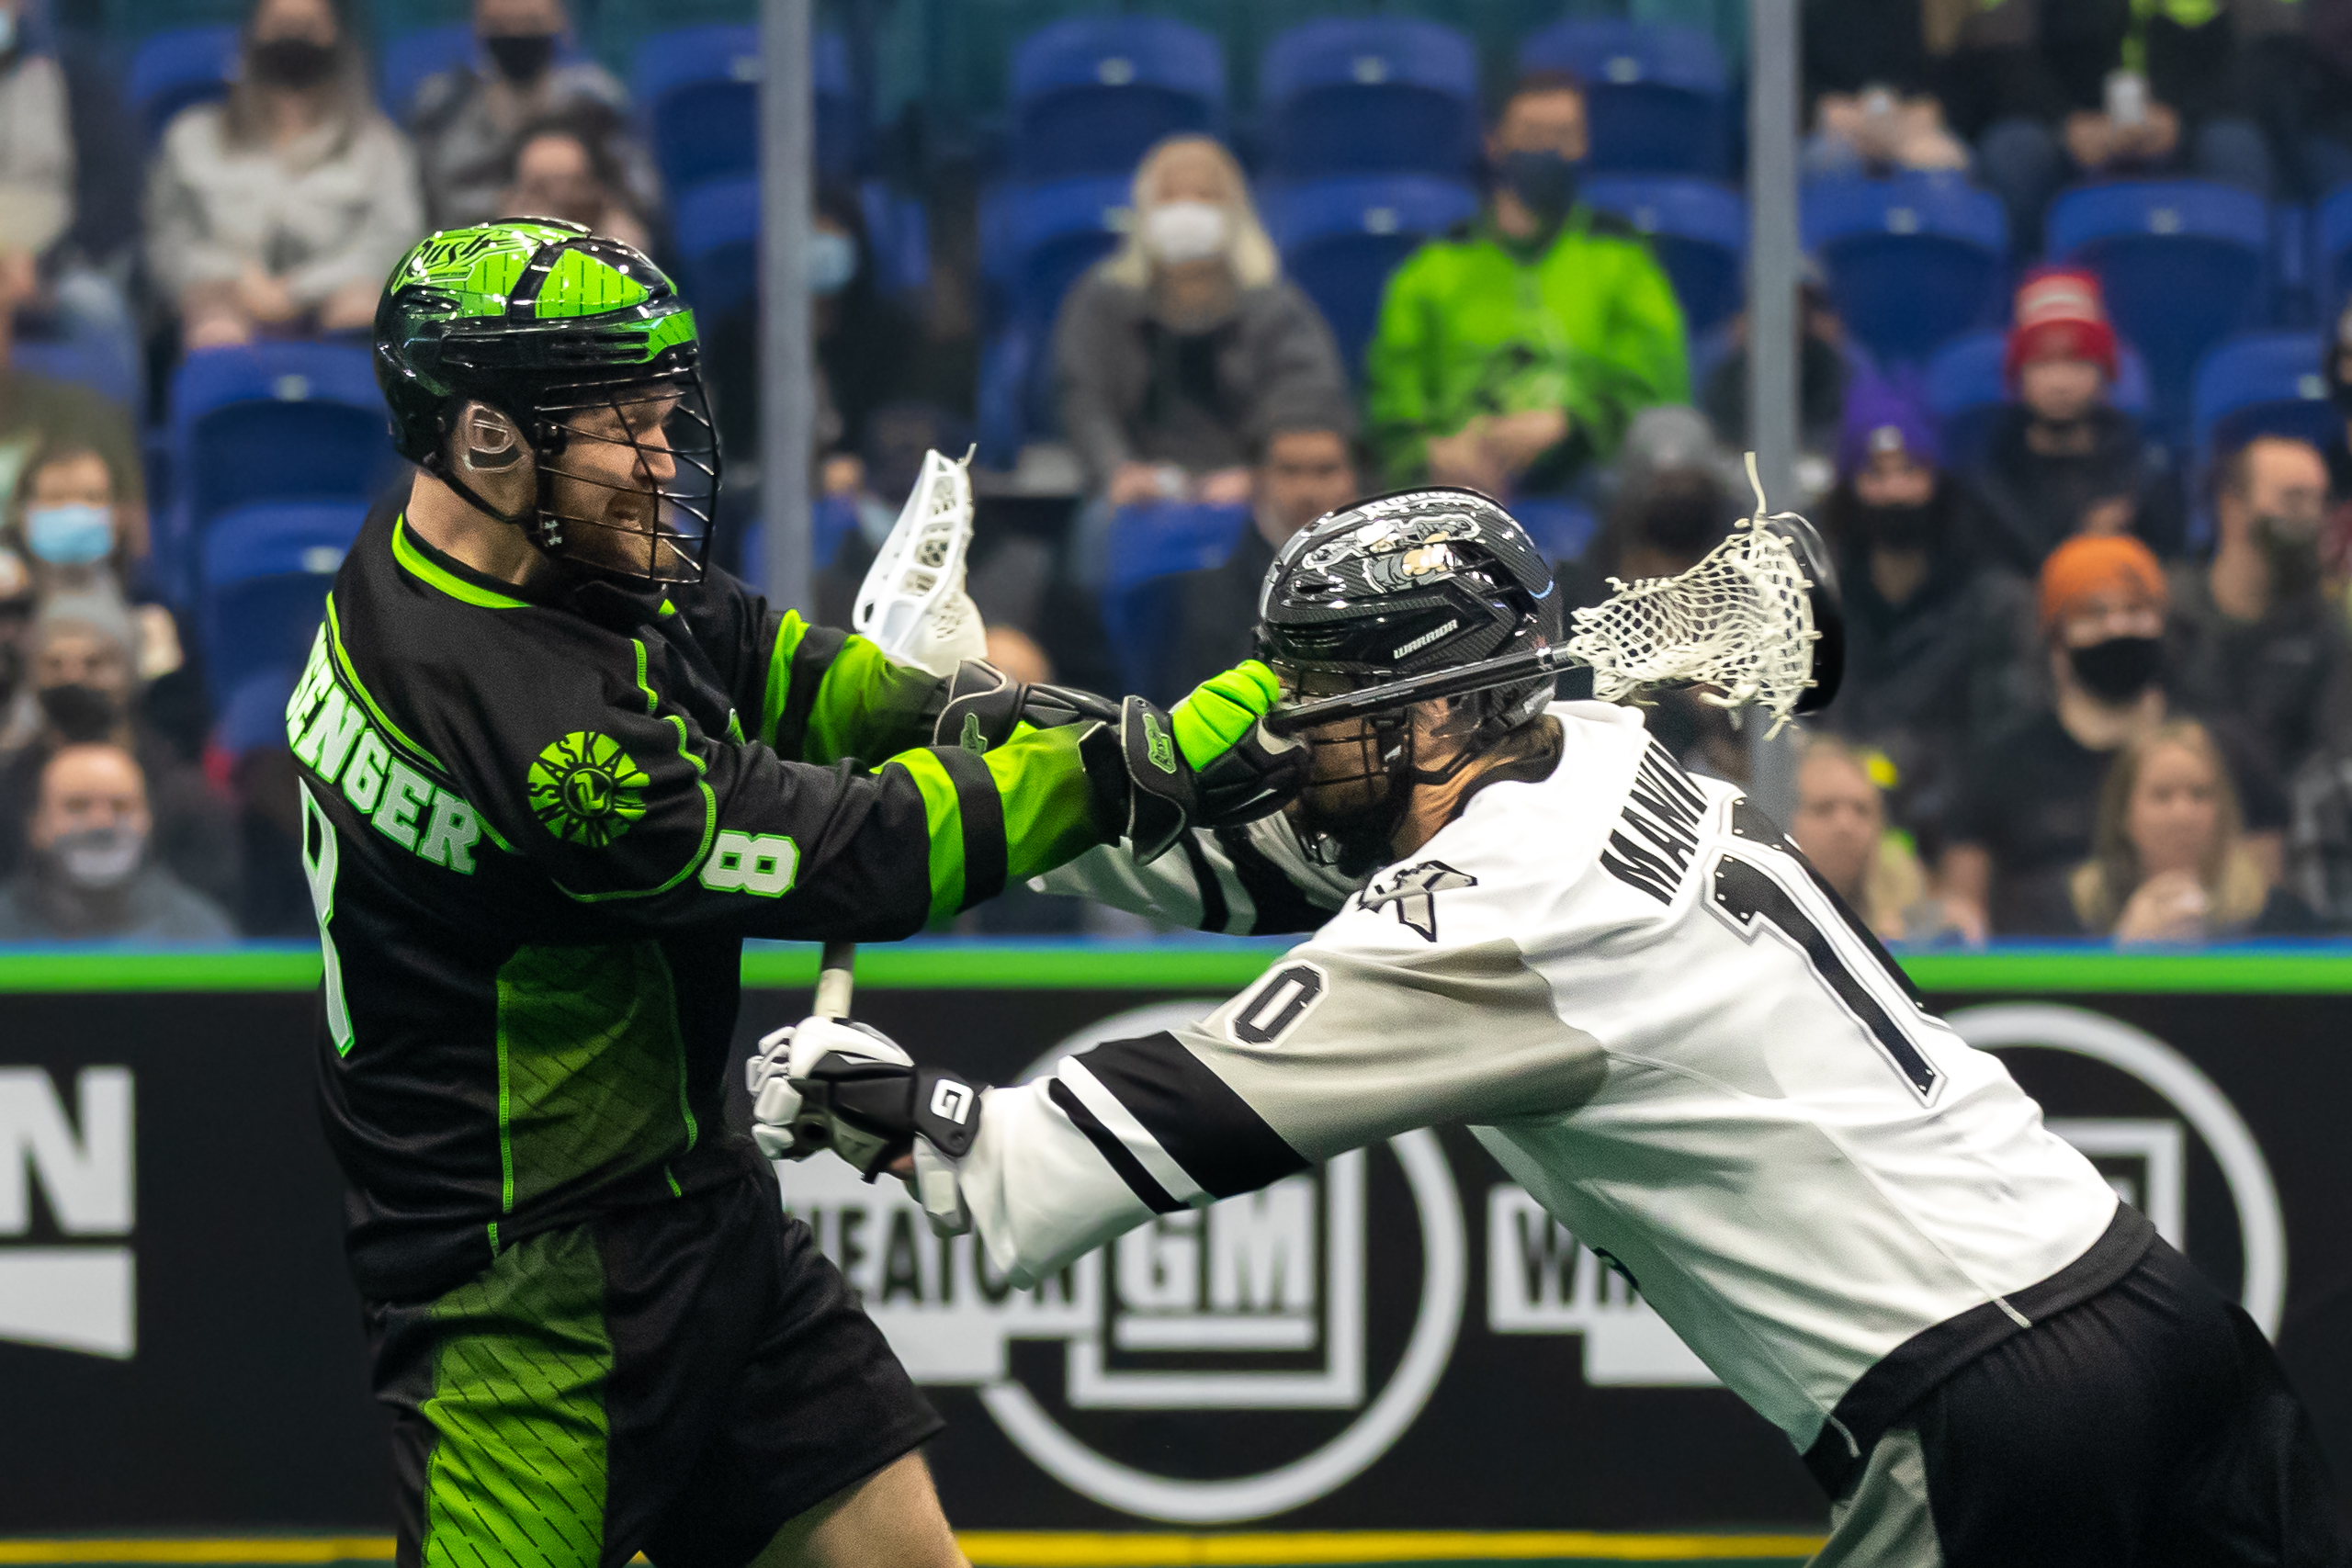 Shorthanded Calgary Roughnecks lose to Seals but earn NLL playoff spot